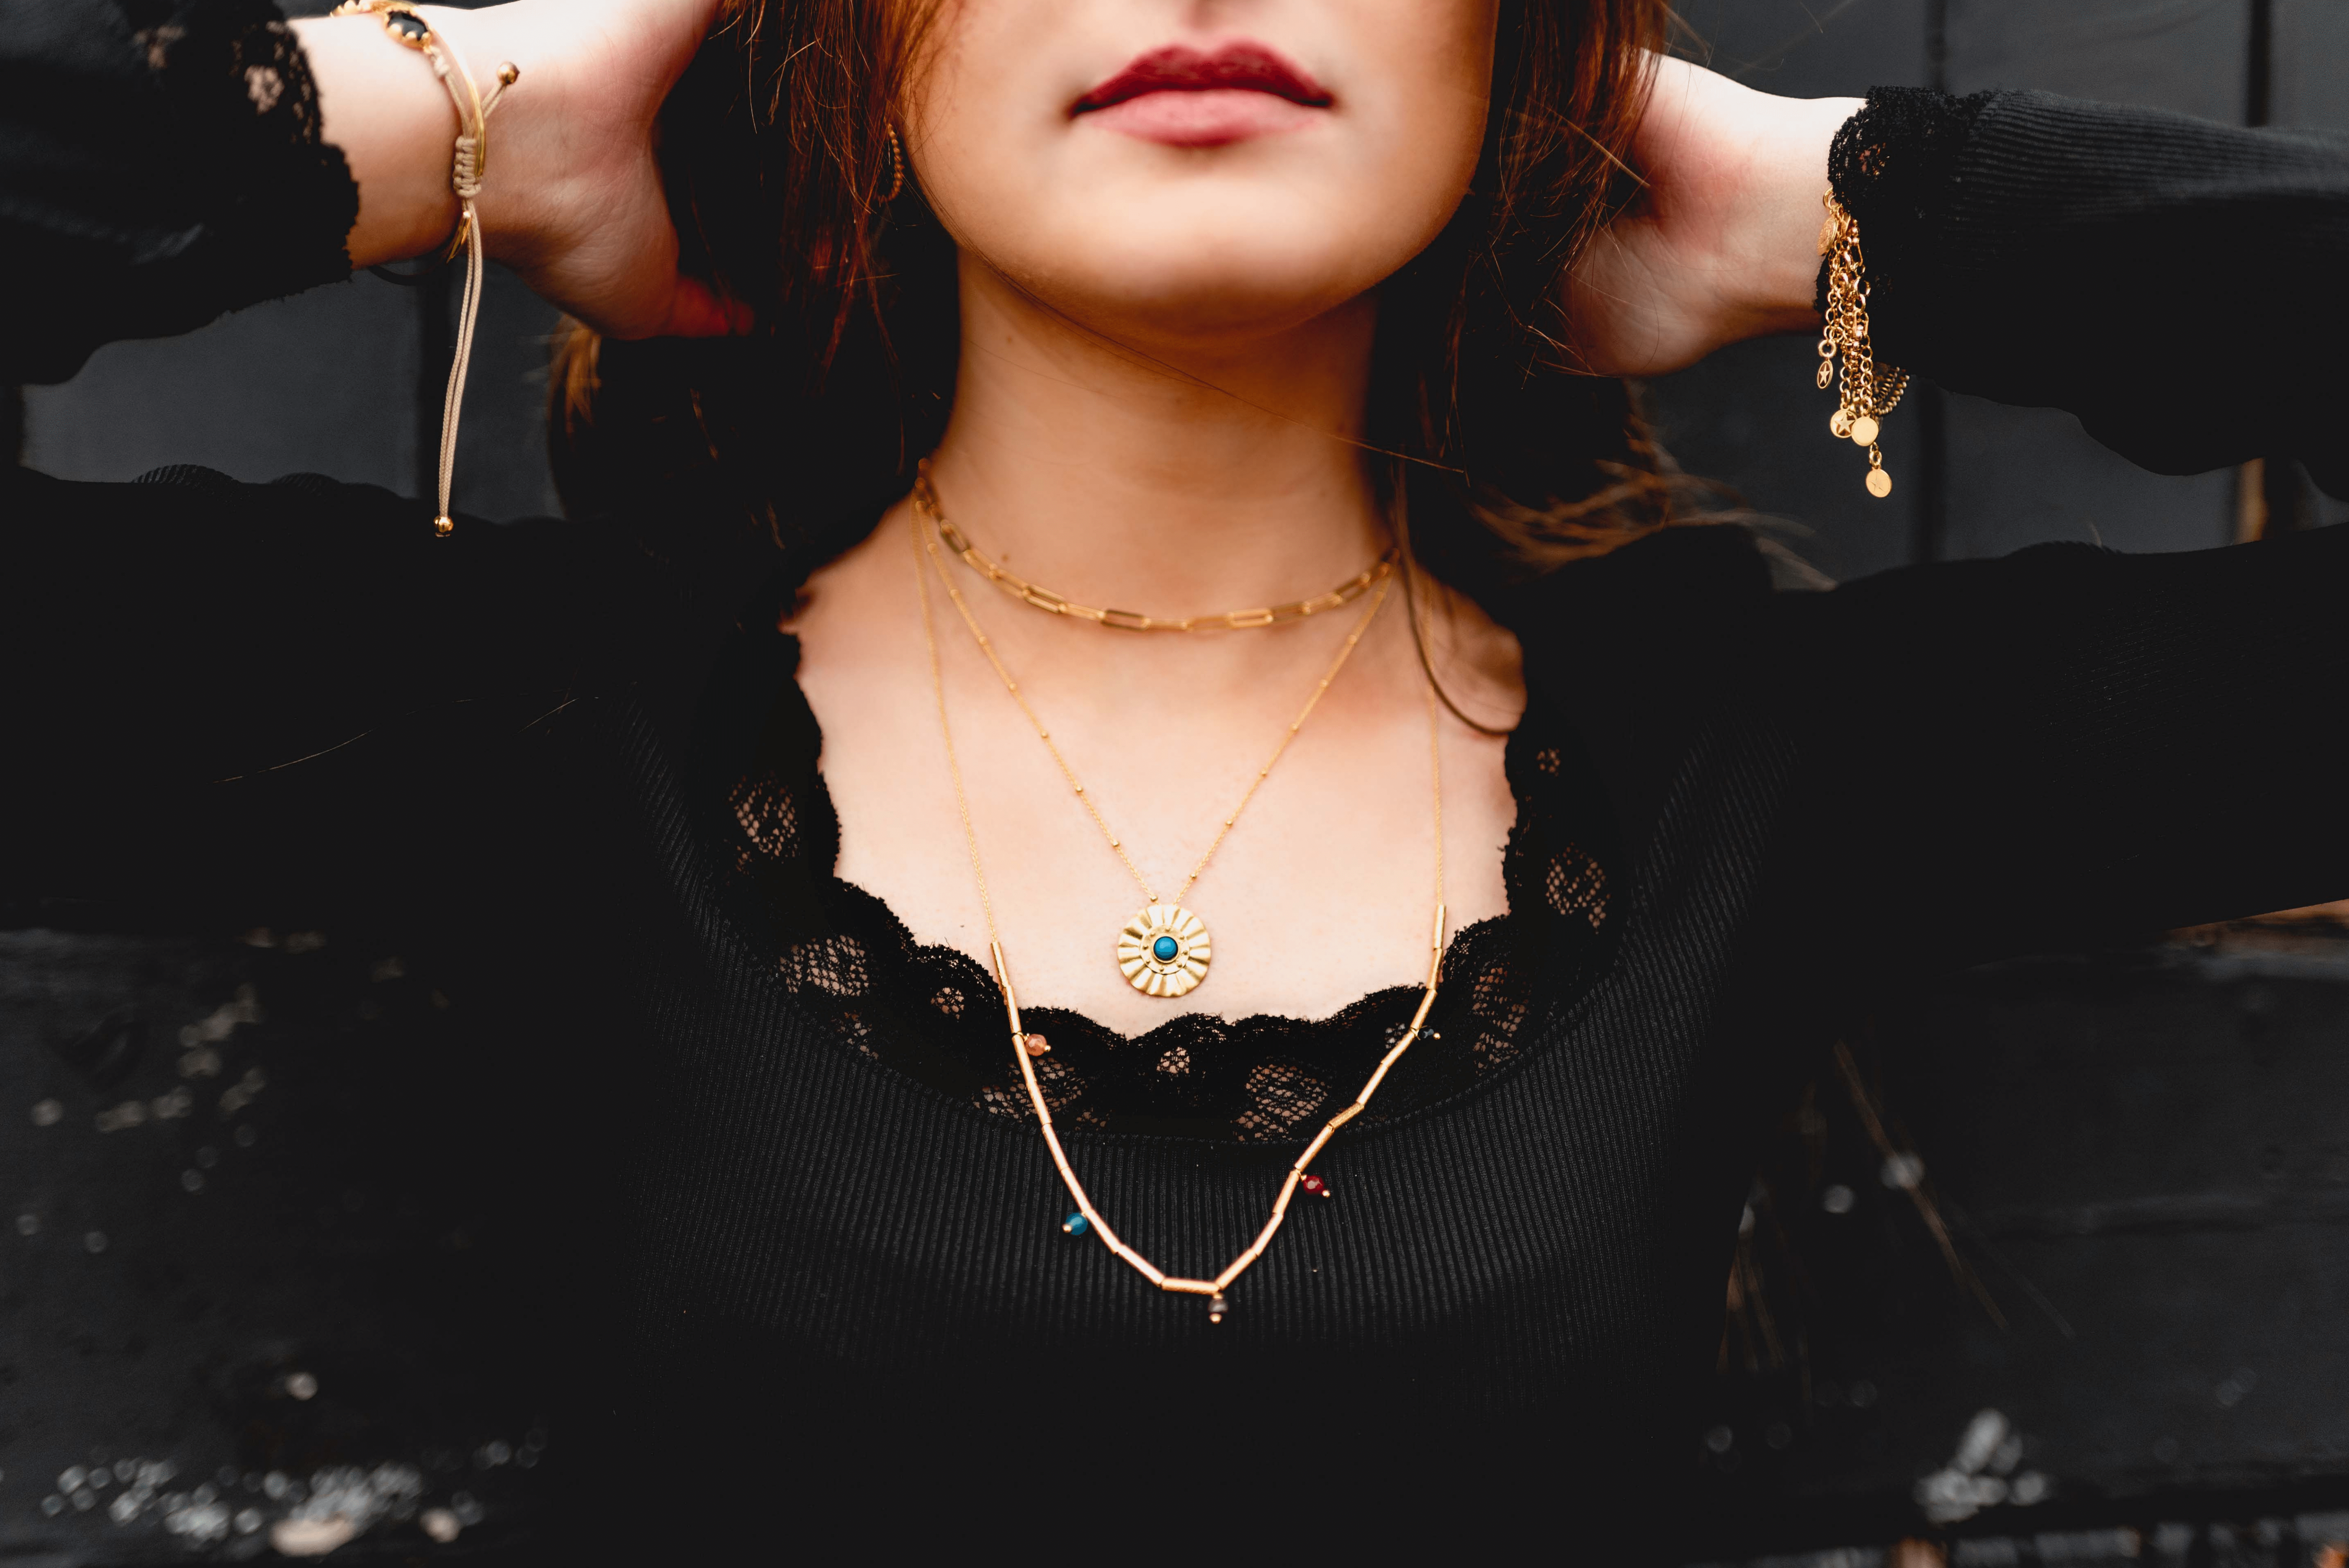 Influenstar Jewellery model with dark hair and black top wears three gold necklaces